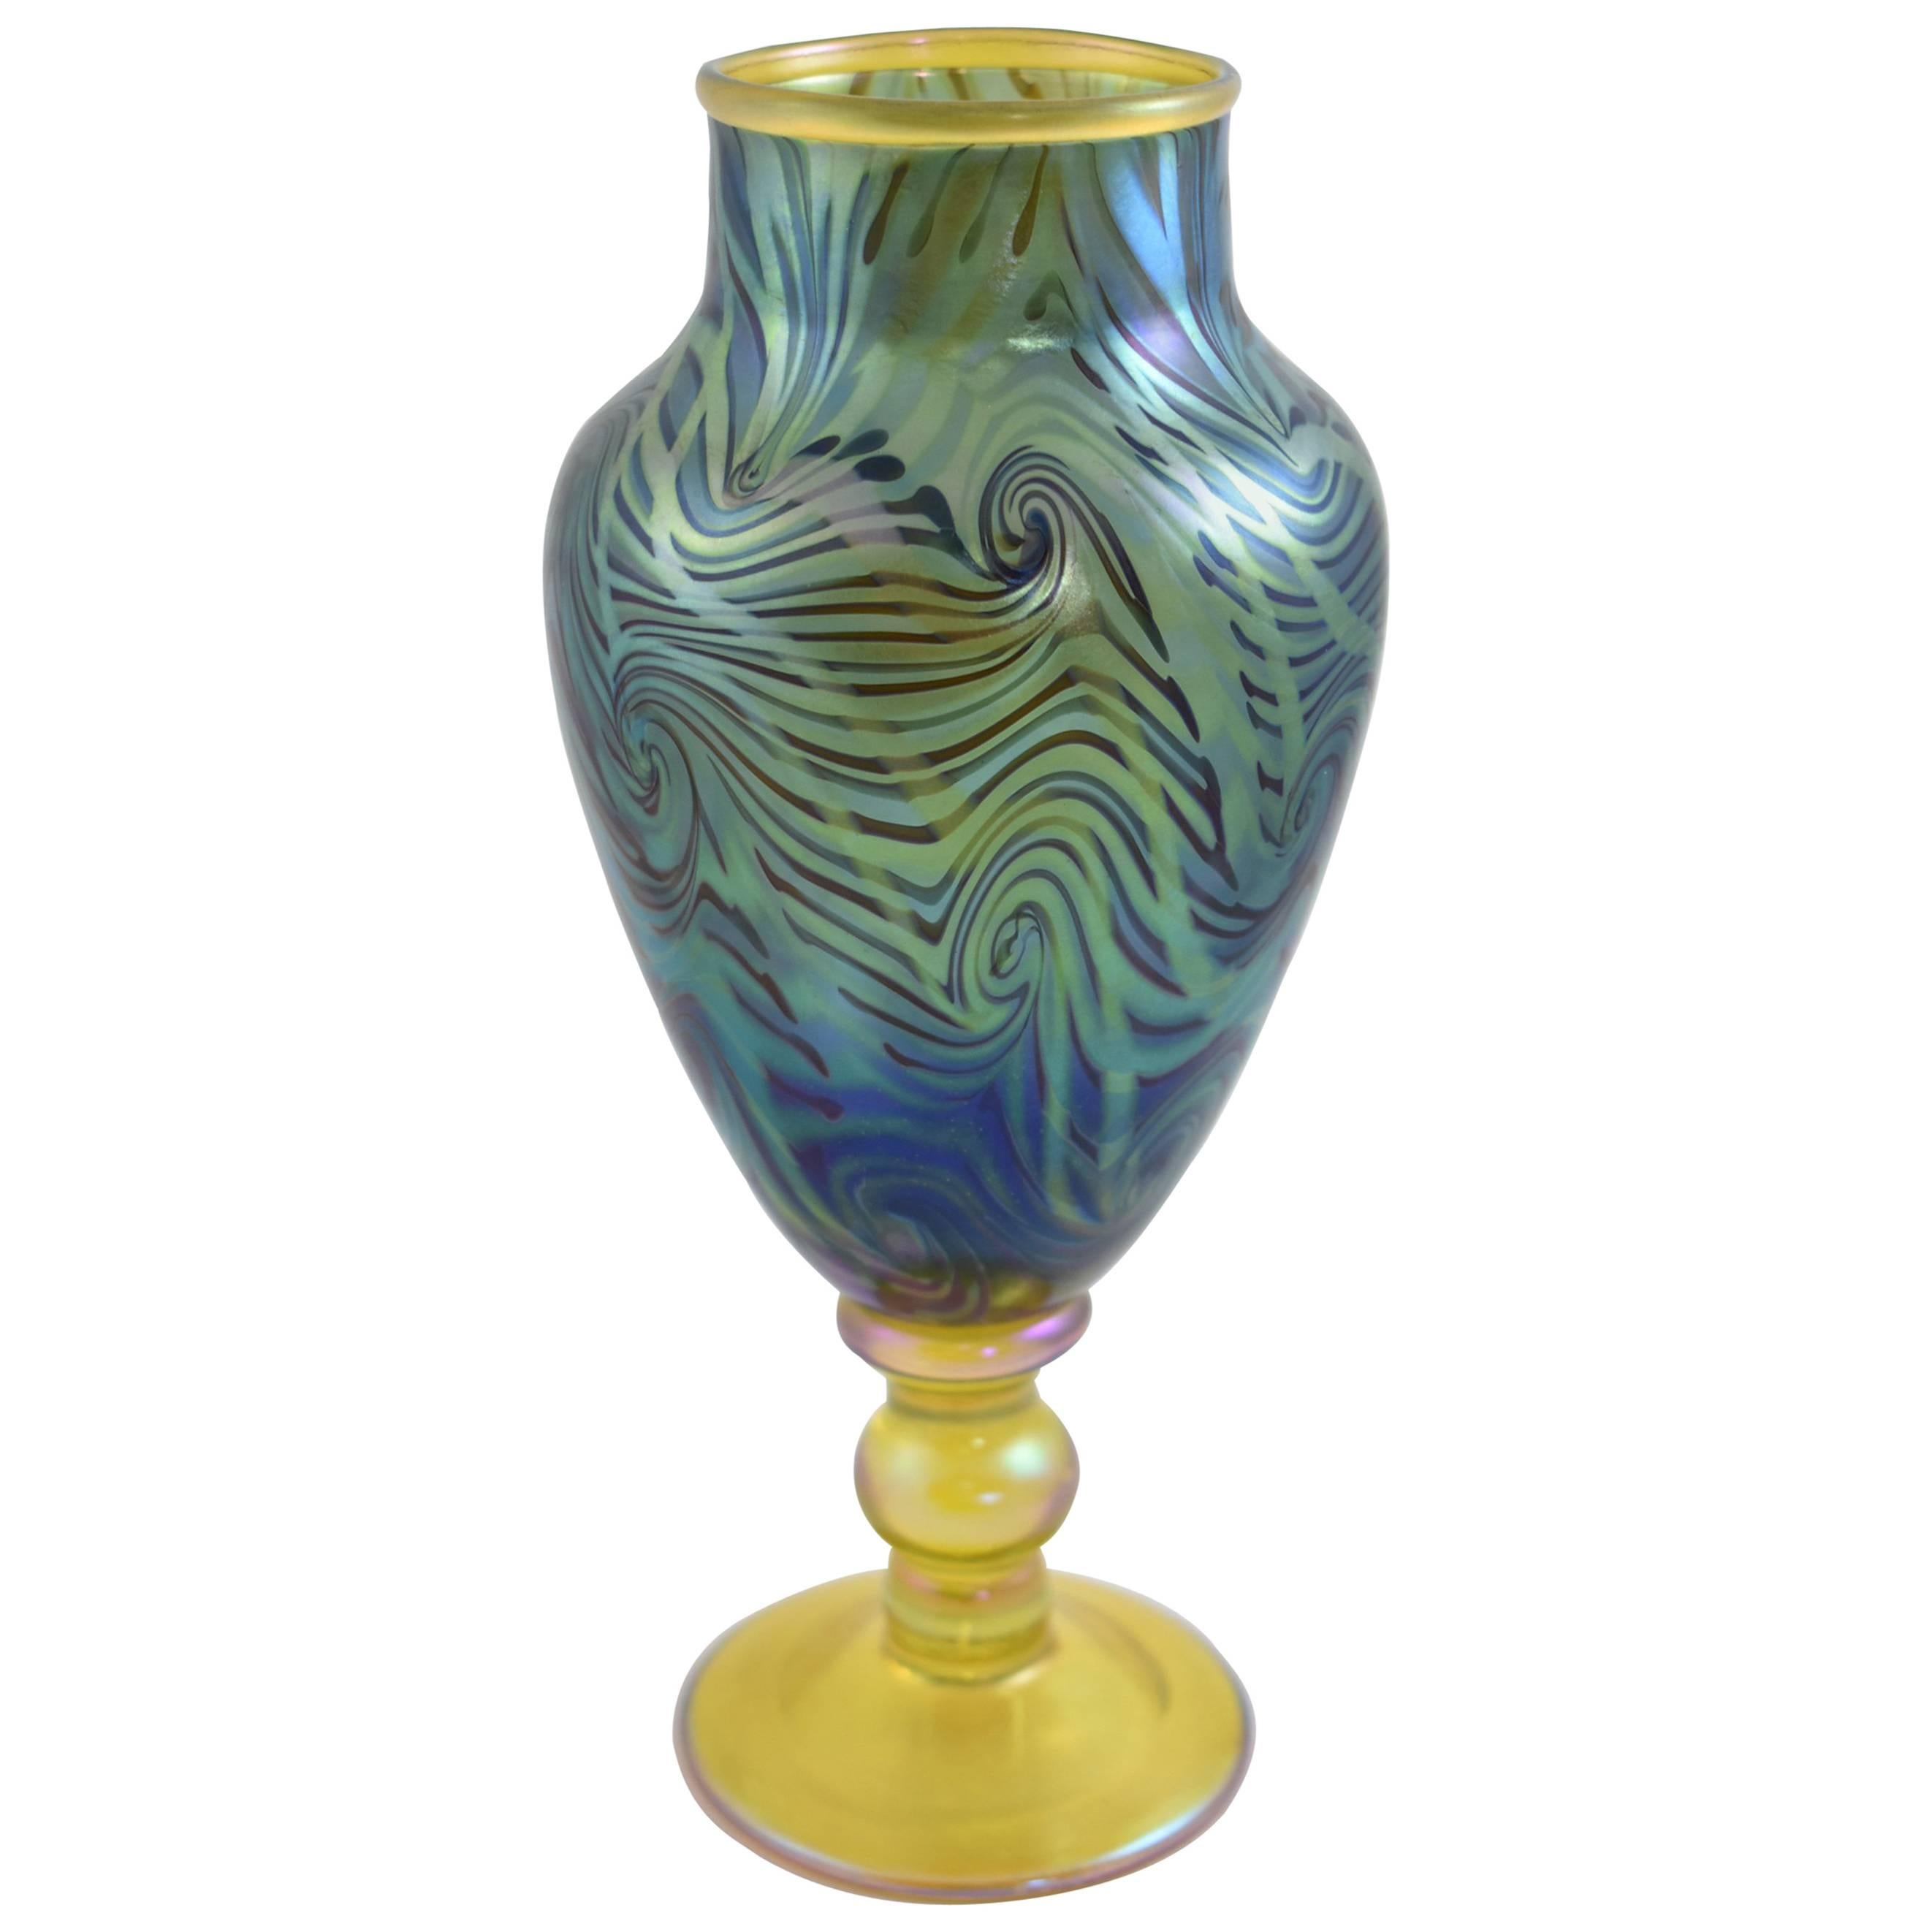 Signed LCT Tiffany King Tut Pattern Iridescent Footed Vase